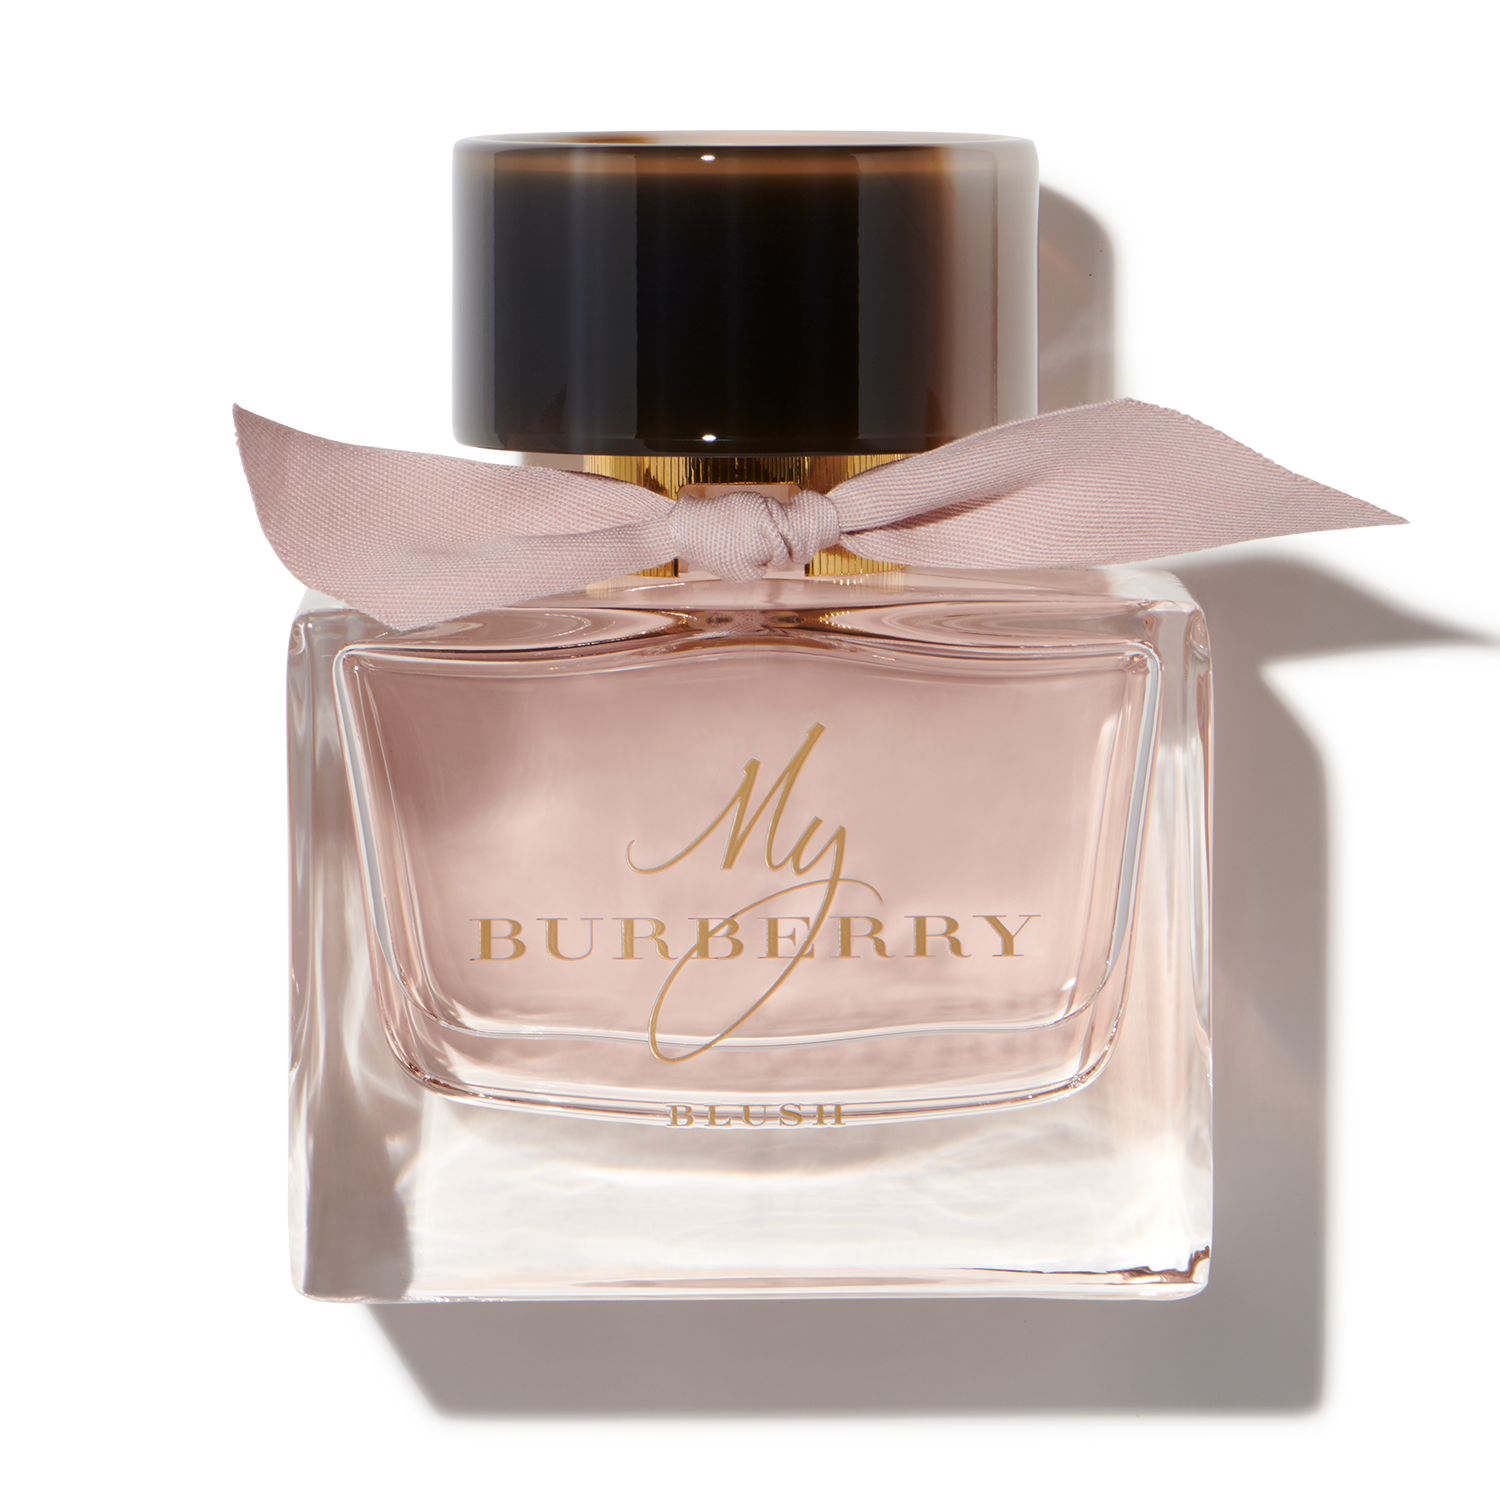 omringen snap catalogus My Burberry Blush by Burberry $16.95/month | Scentbird